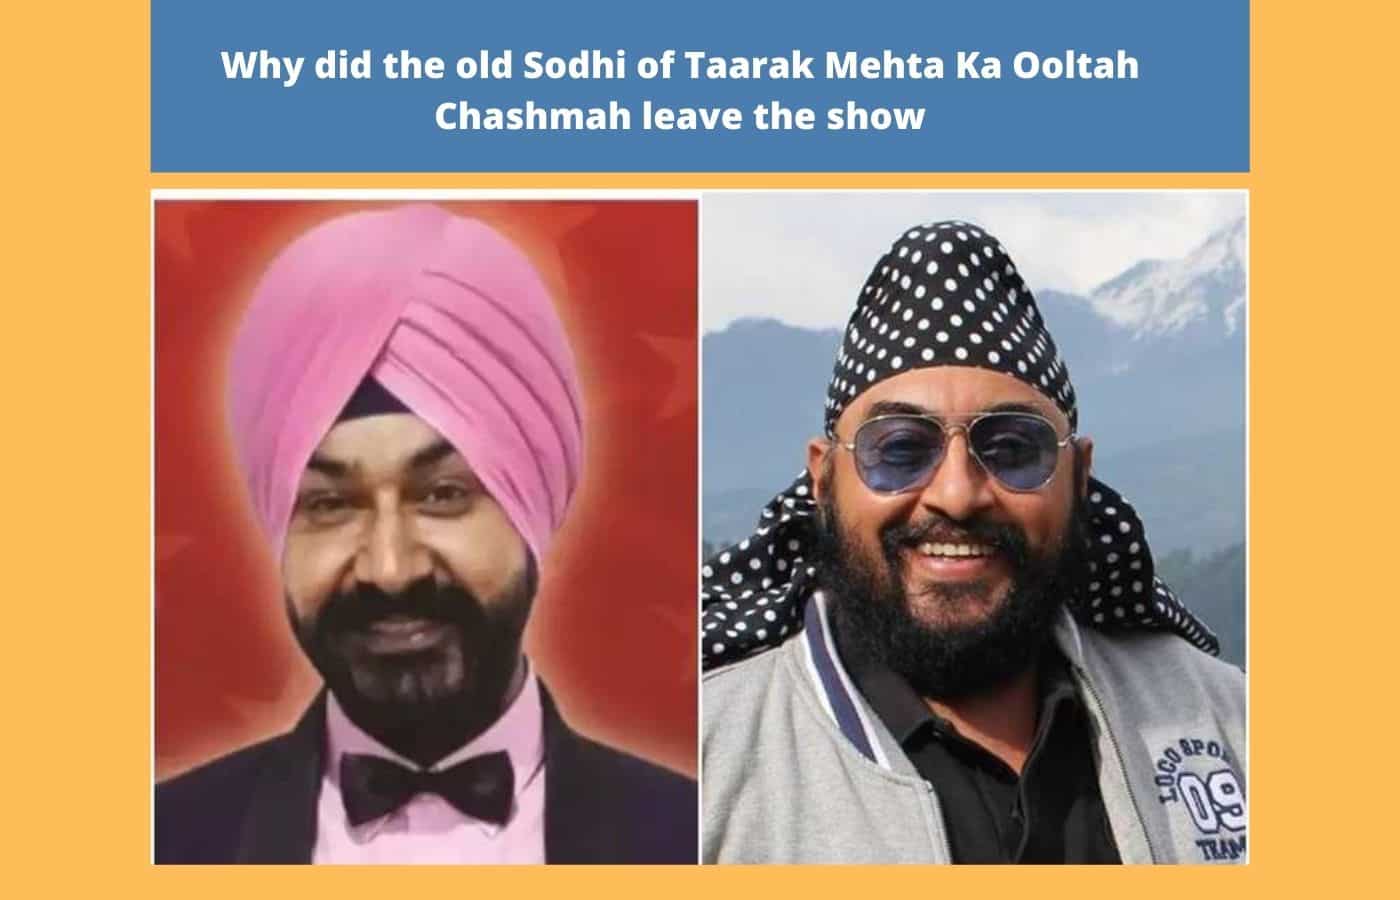 Why did the old Sodhi of Taarak Mehta Ka Ooltah Chashmah leave the show